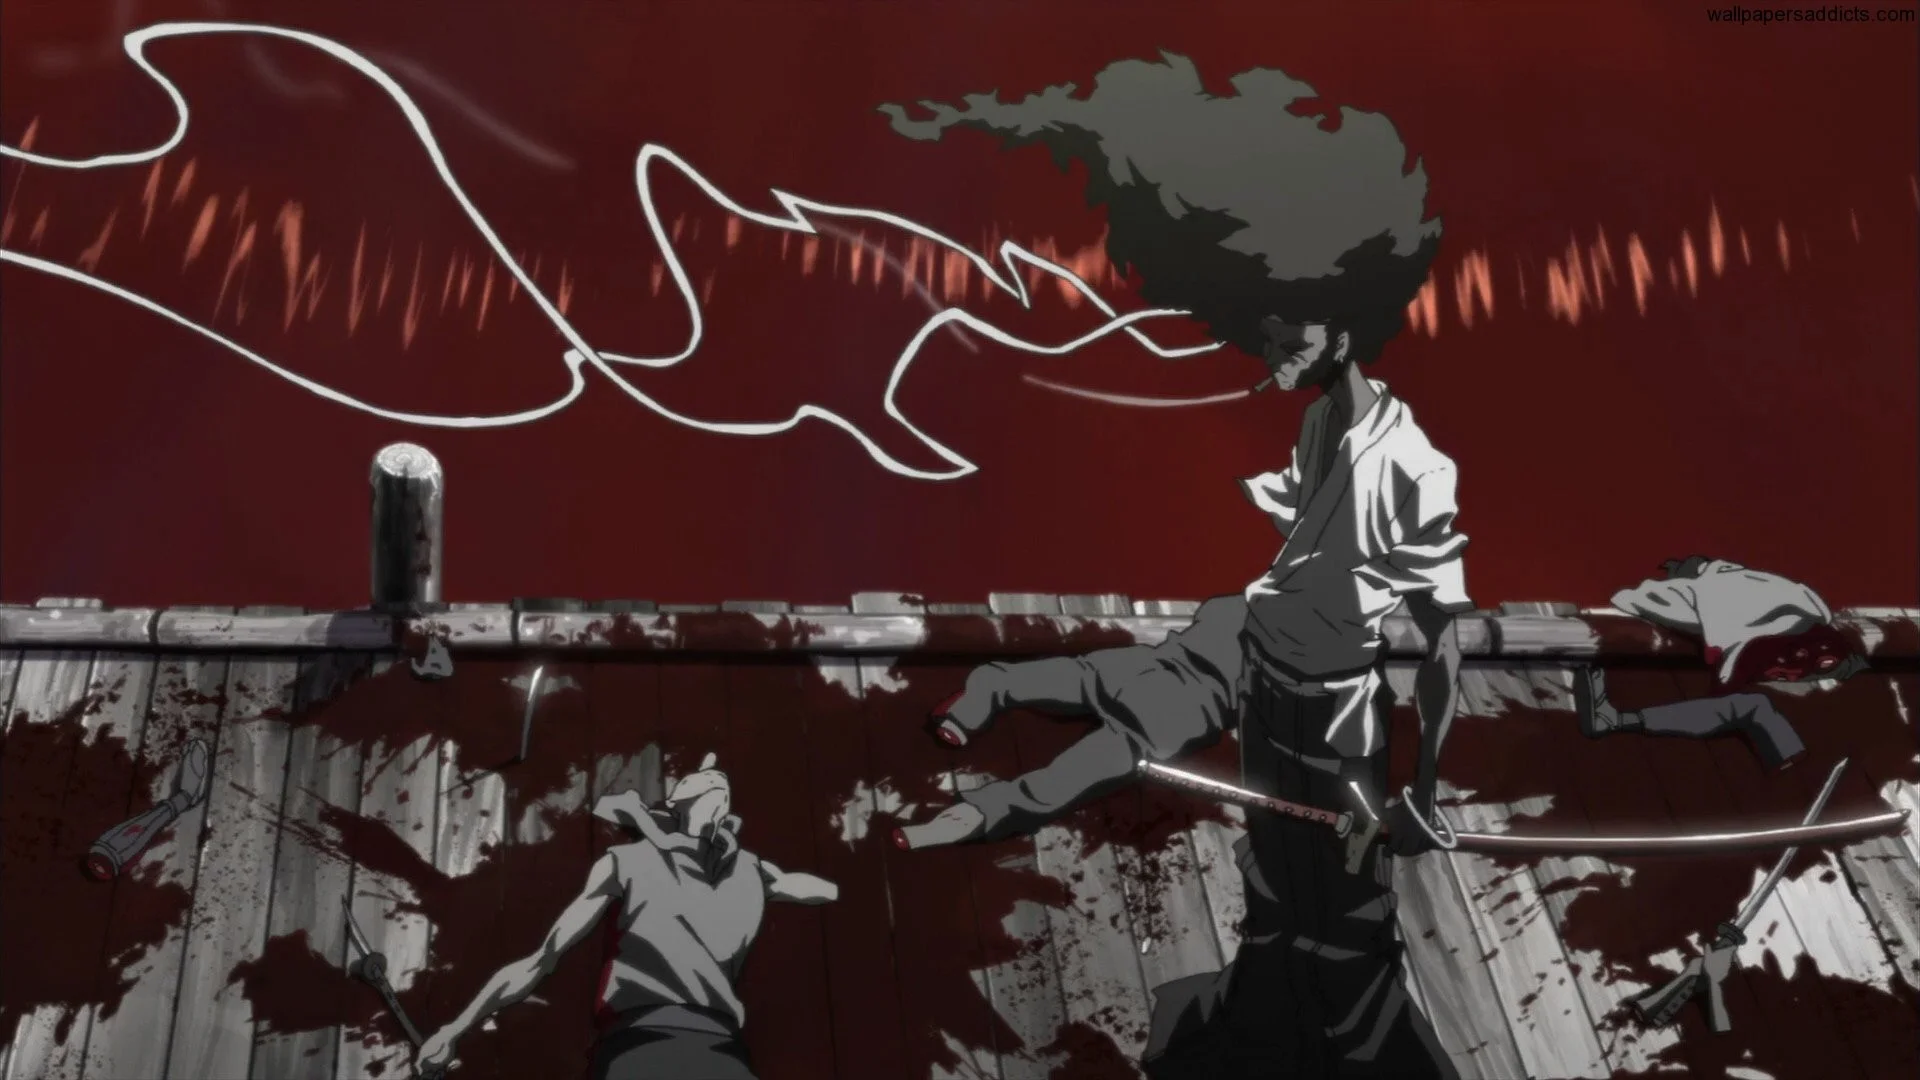 River of Blood – by Afro Samurai